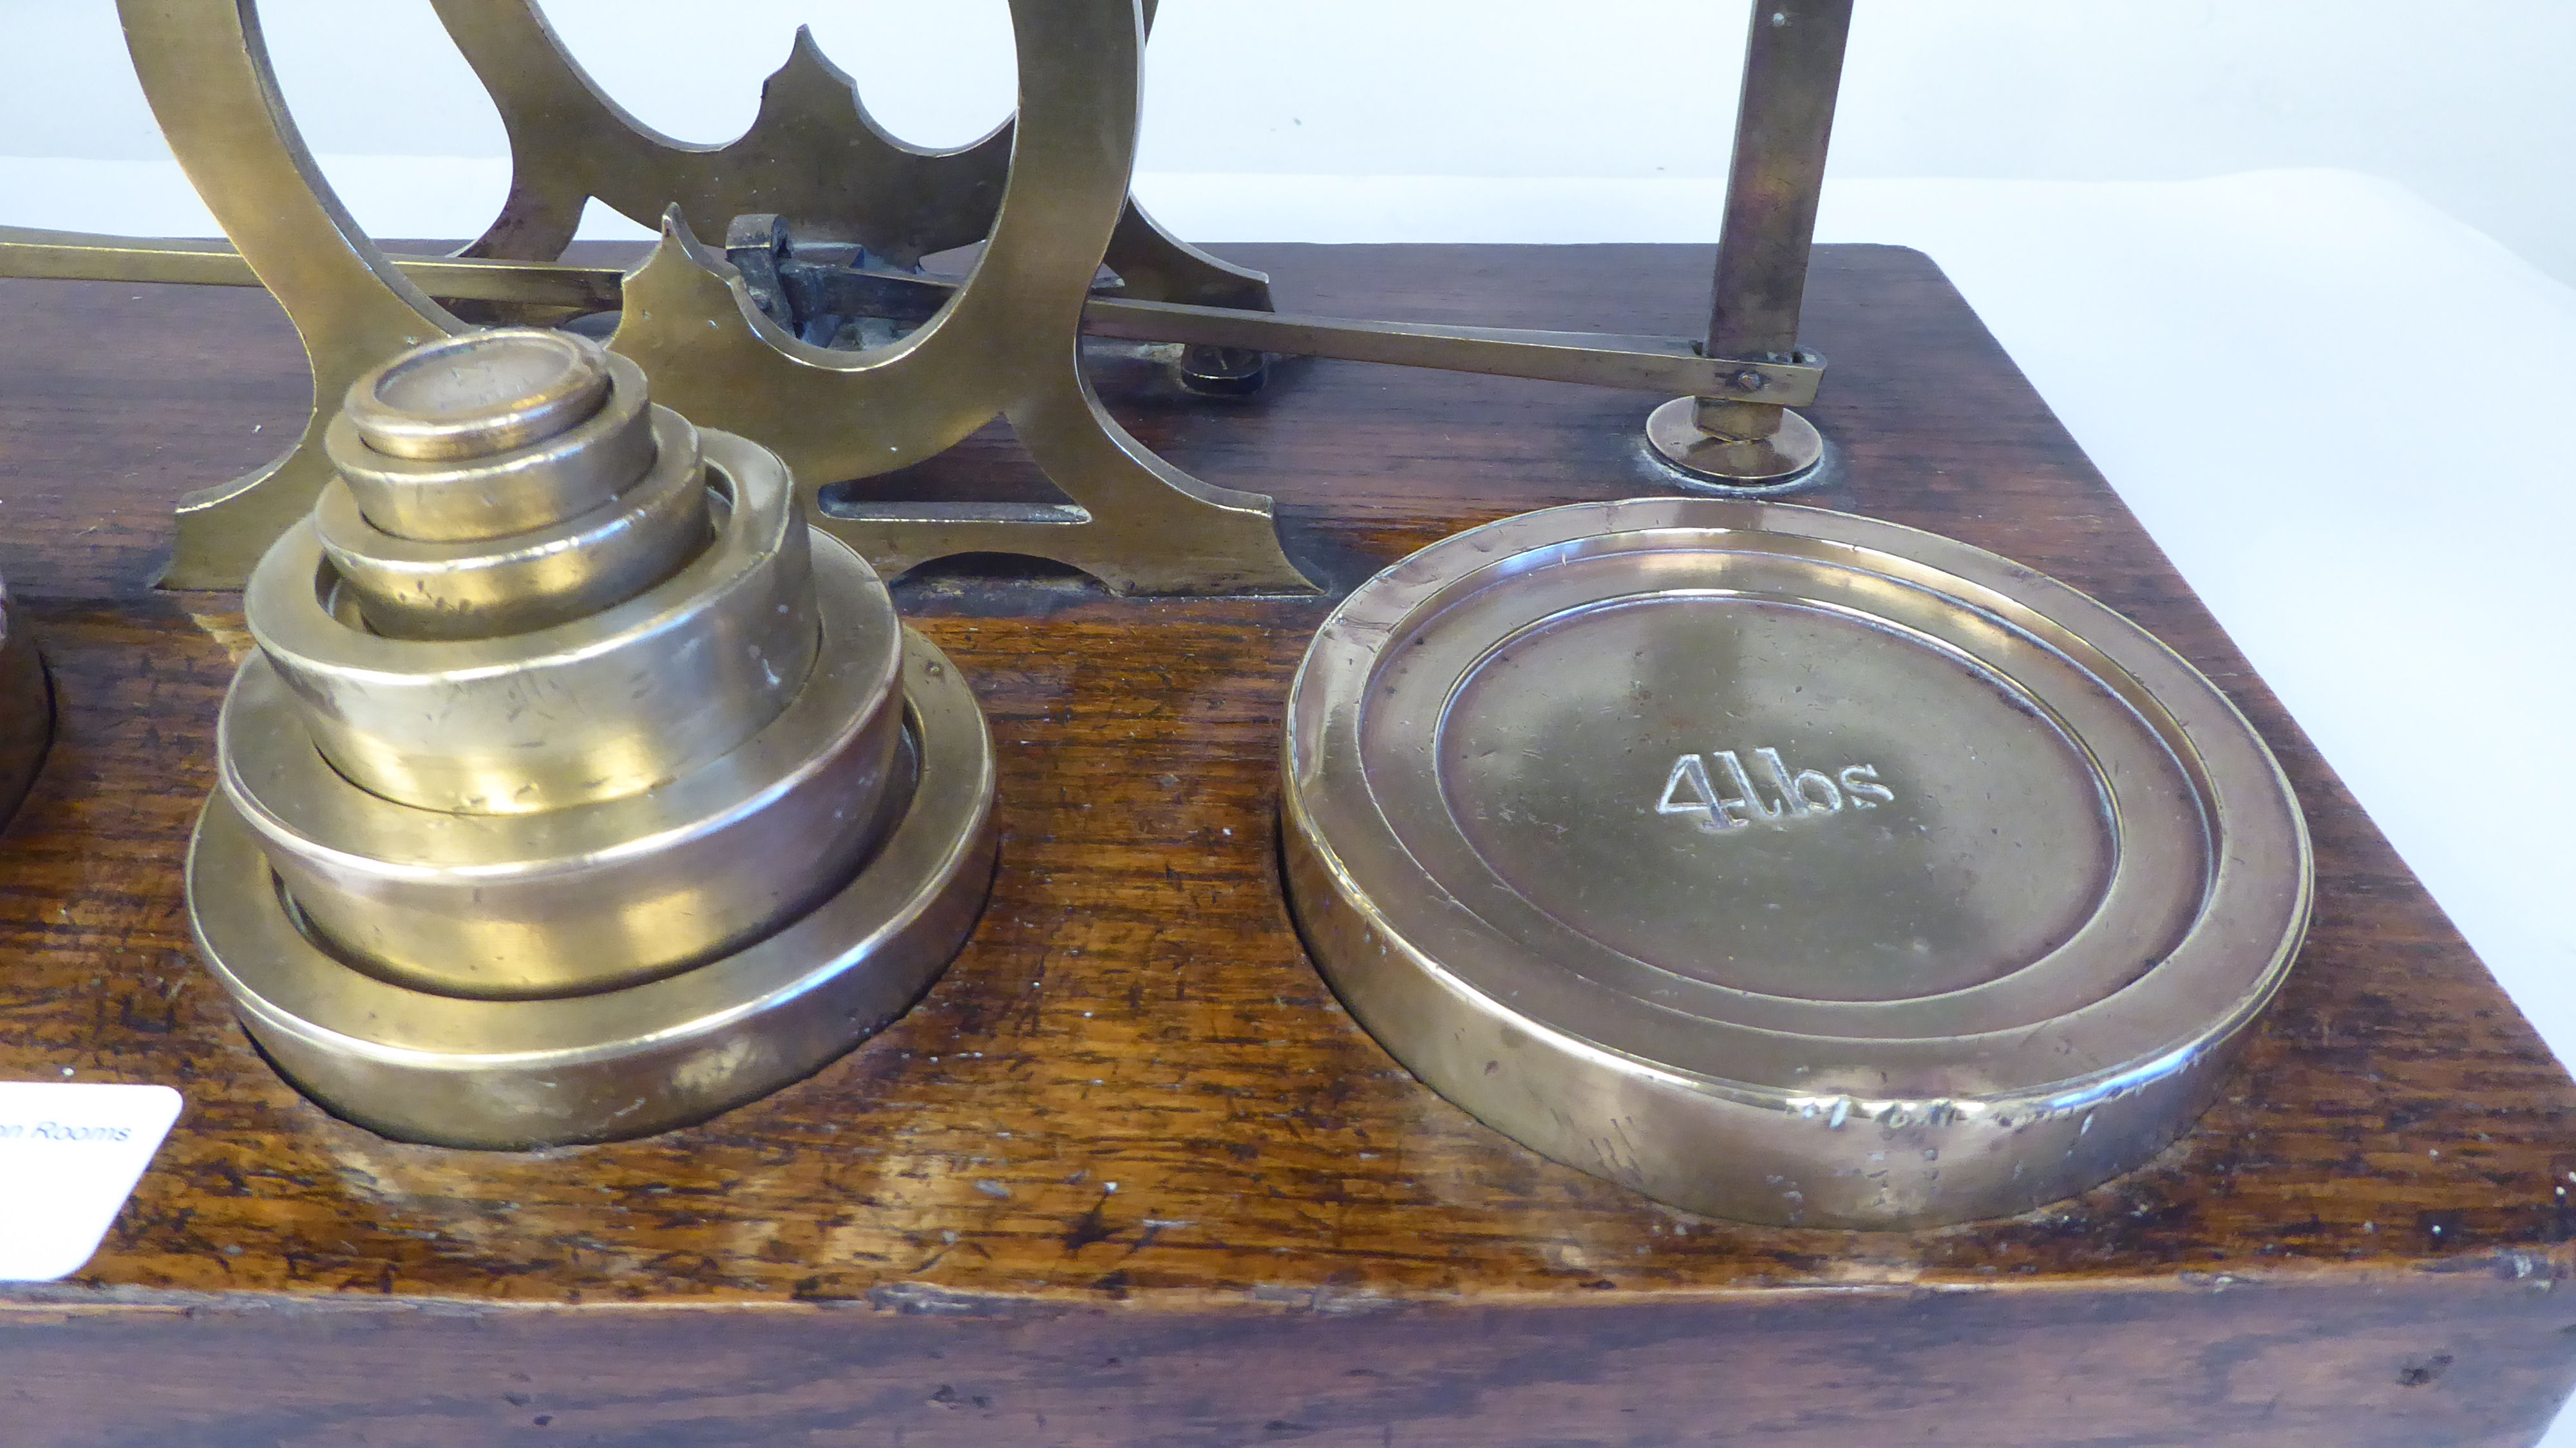 Late Victorian S.Mordan & Co, London, lacquered brass beam balance postal scales, attached to an oak - Image 5 of 9